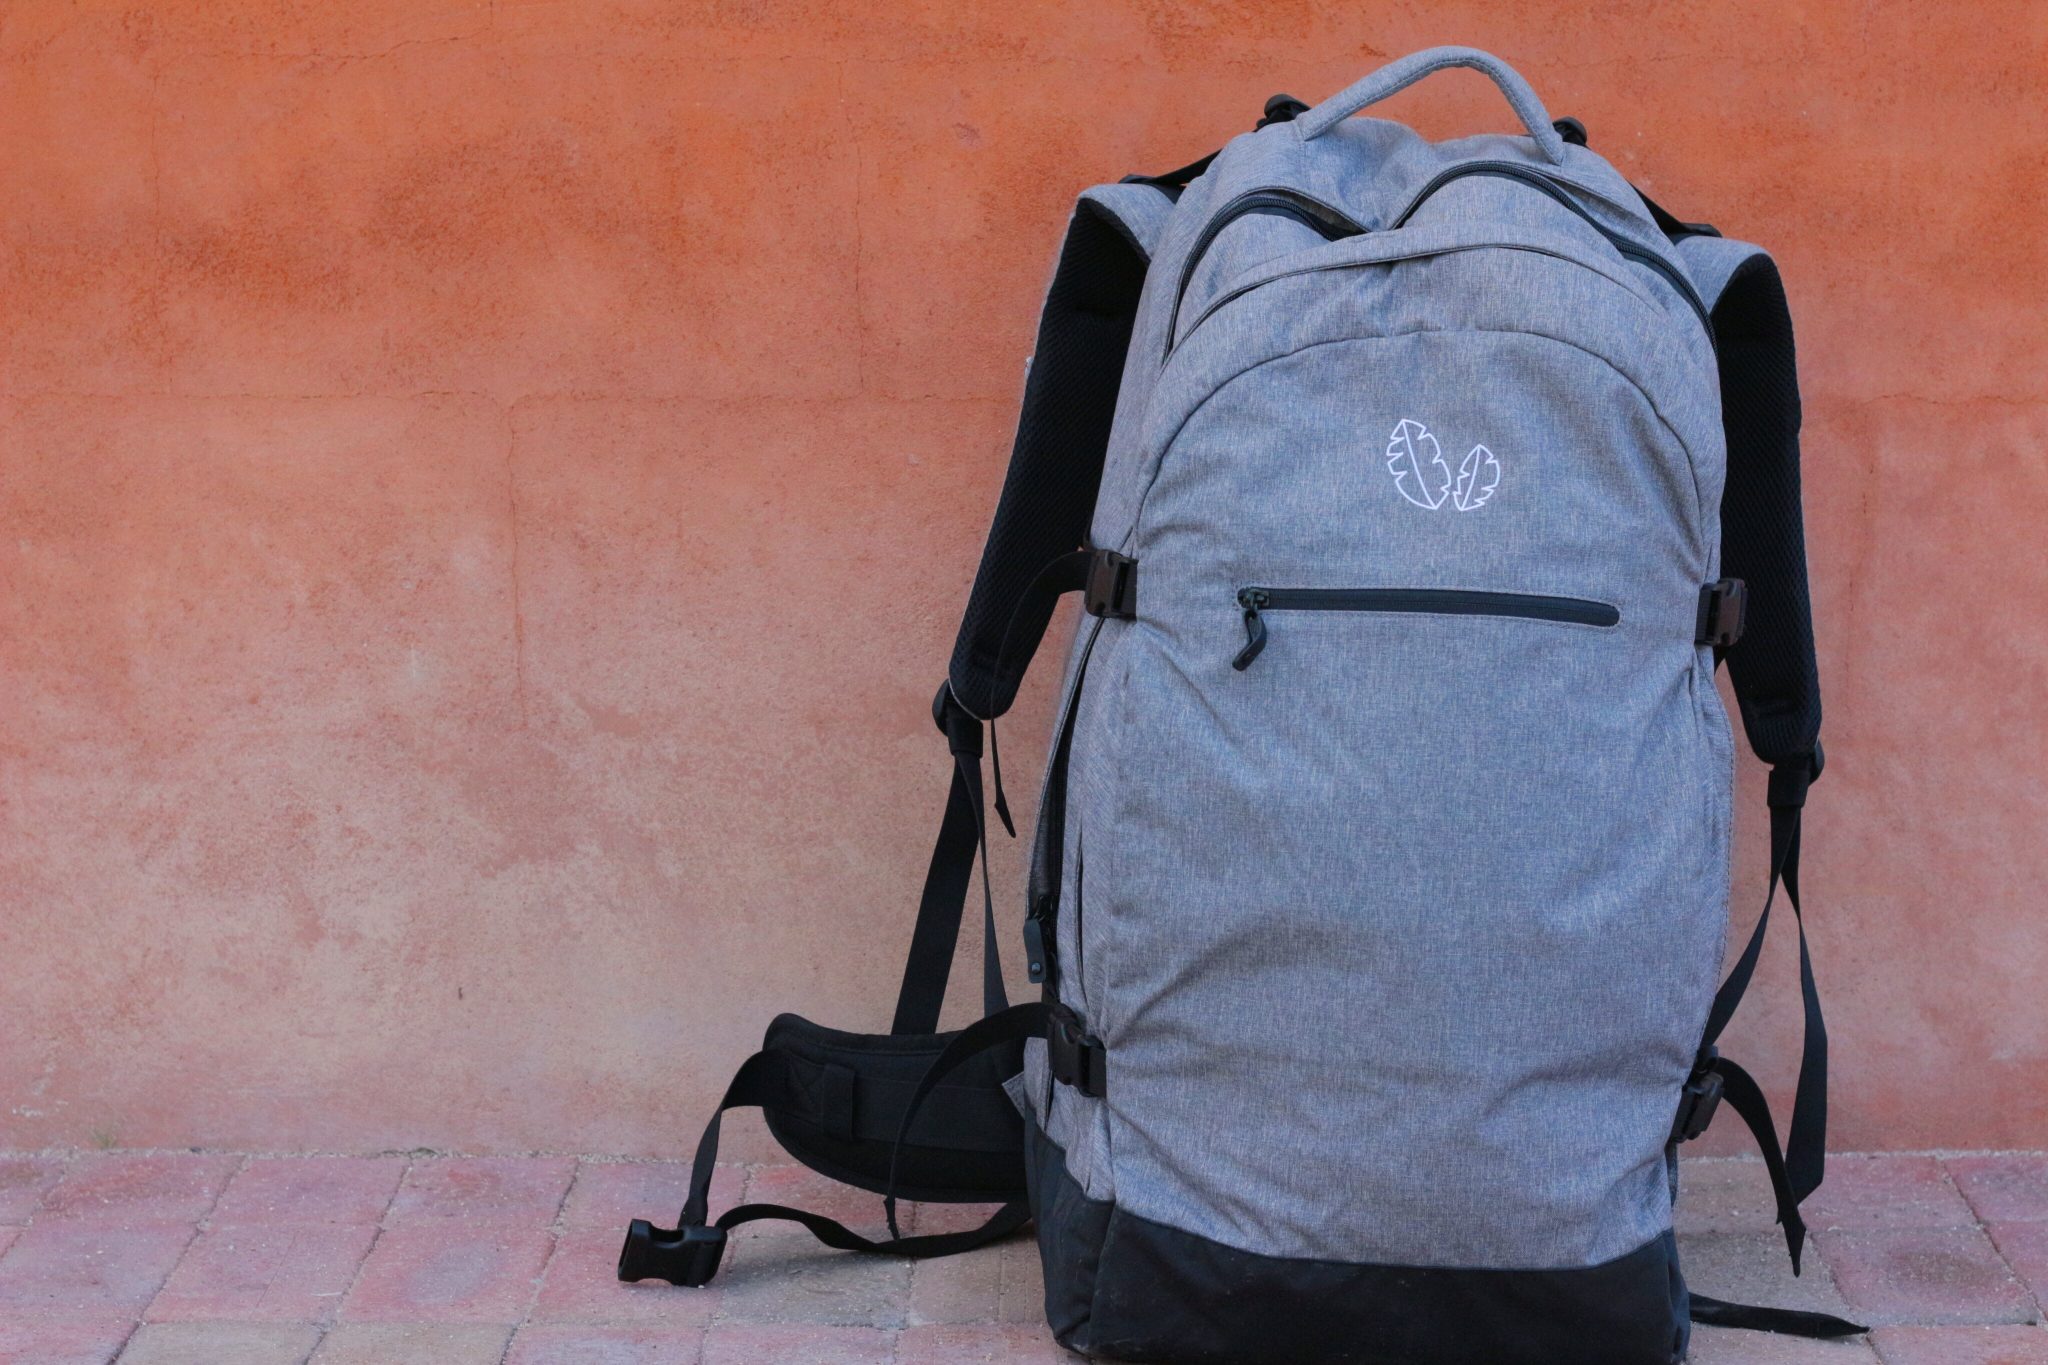 REVIEW: This Travel Backpack For Digital Nomads Is Stylish & Has A Positive Social Impact